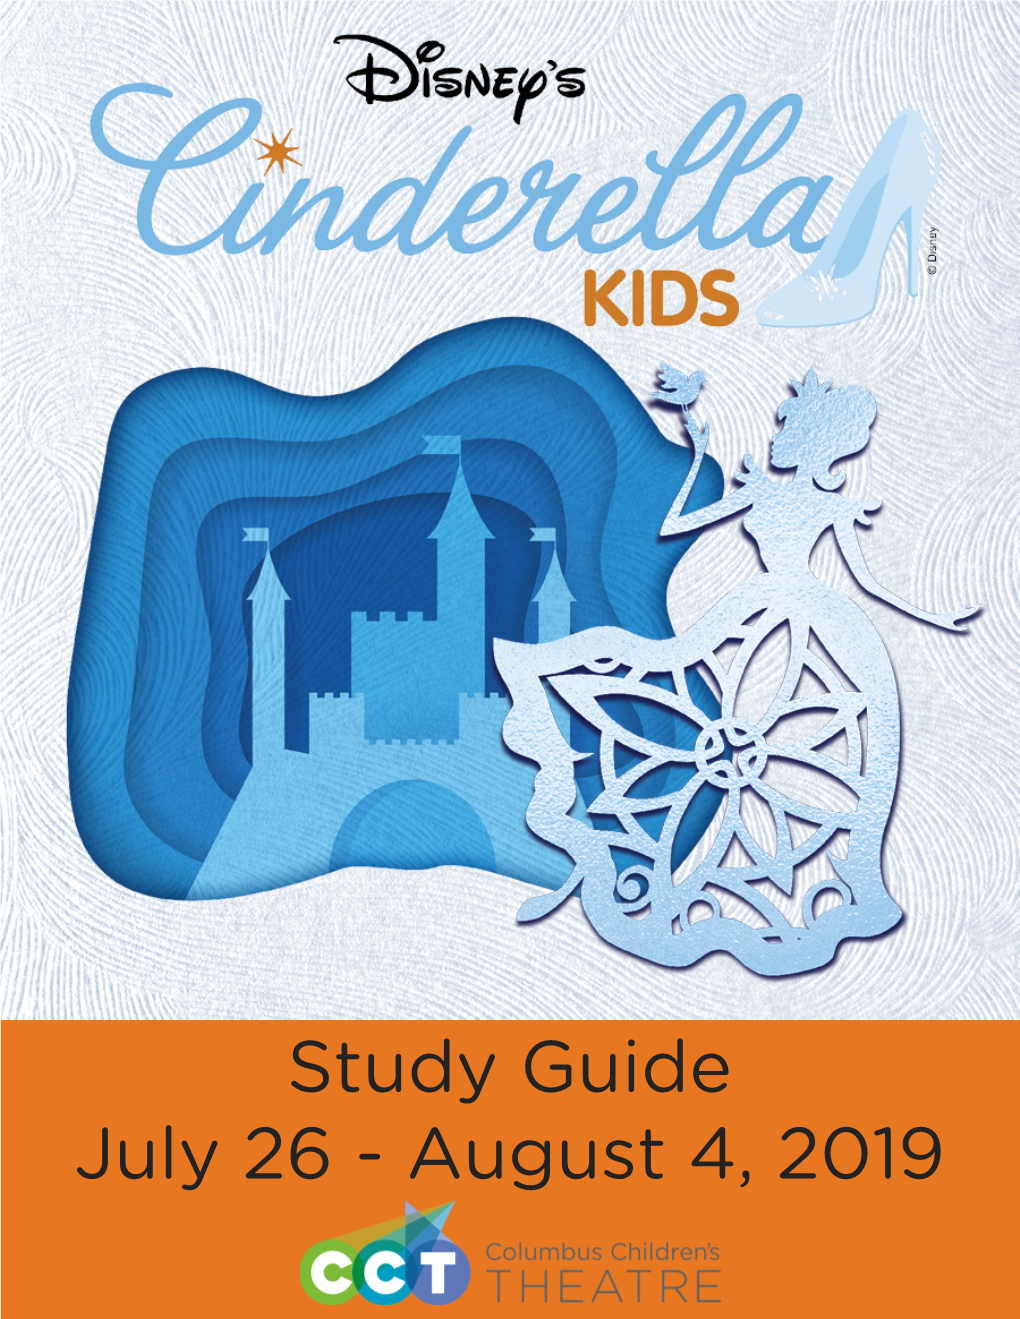 Cinderella KIDS! Within Our Study Guide You Will Find Helpful Tips to Prepare Your Students to Experience and Talk About the Performance